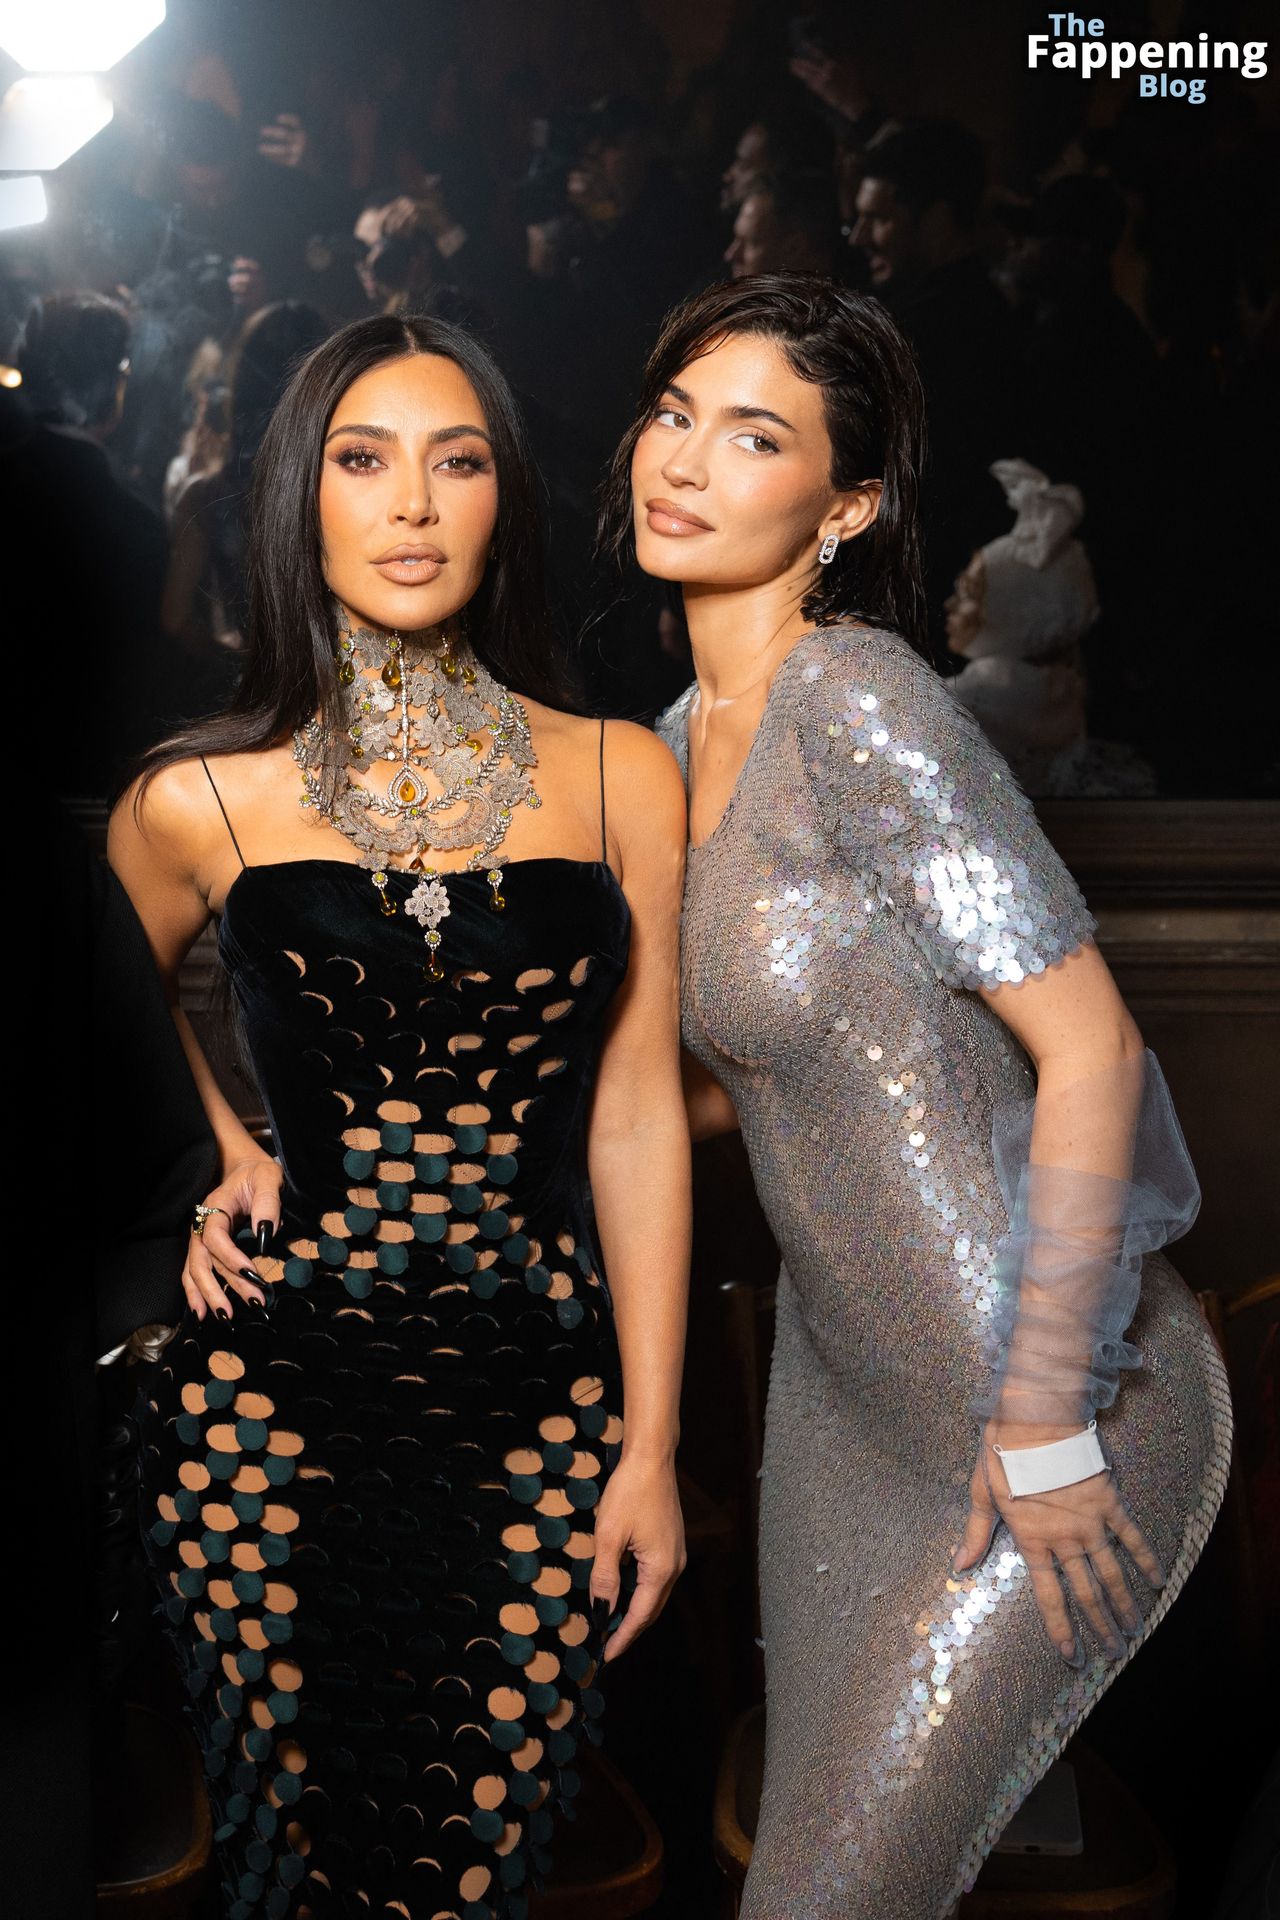 Kylie Jenner Stuns in a Silver Dress at the Paris Fashion Week (116 Photos)